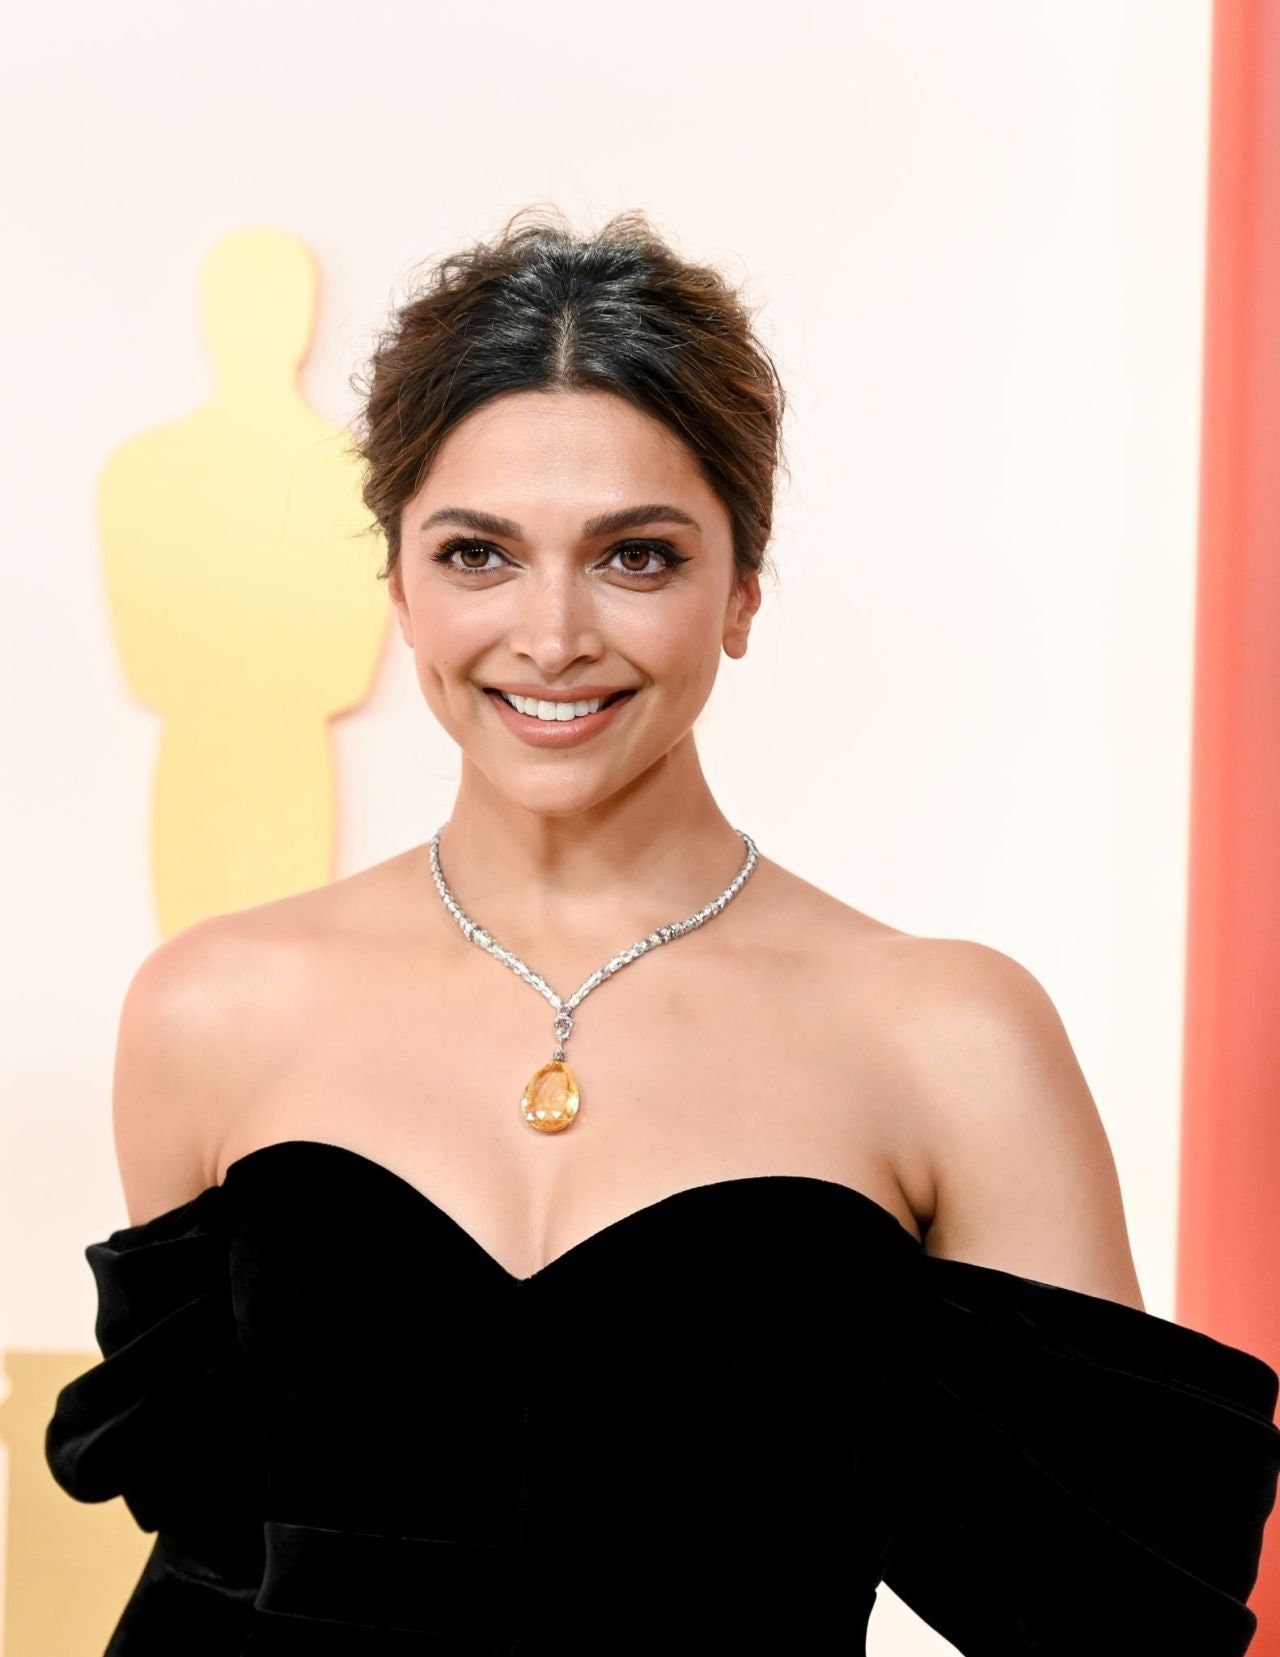 The cost of Deepika Padukone's bag can fund your trip to Europe